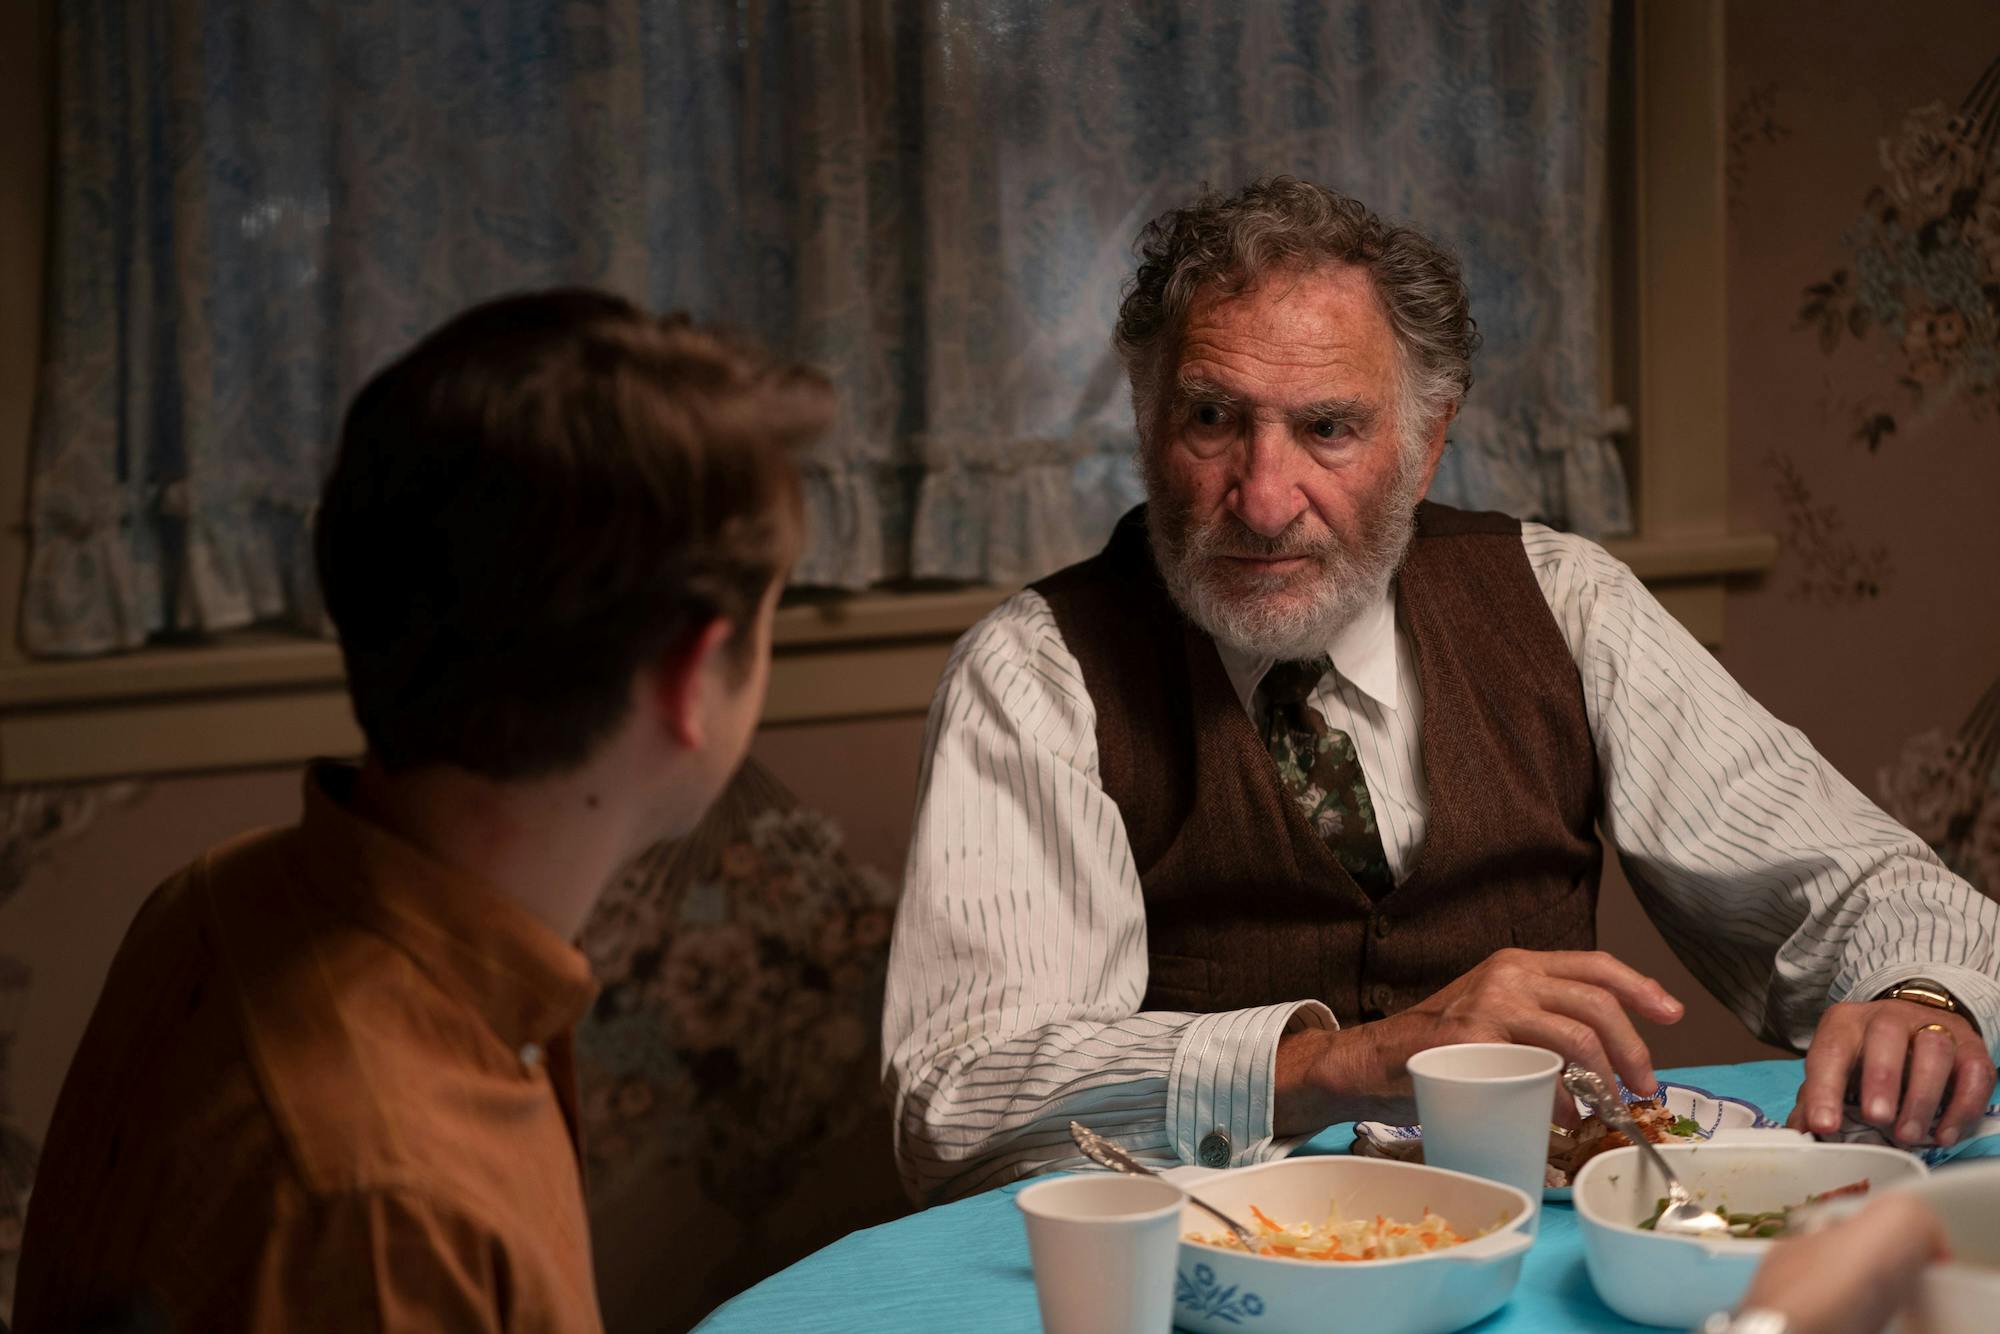 gabriel labelle (left) and judd hirsch (right) in the fabelmans